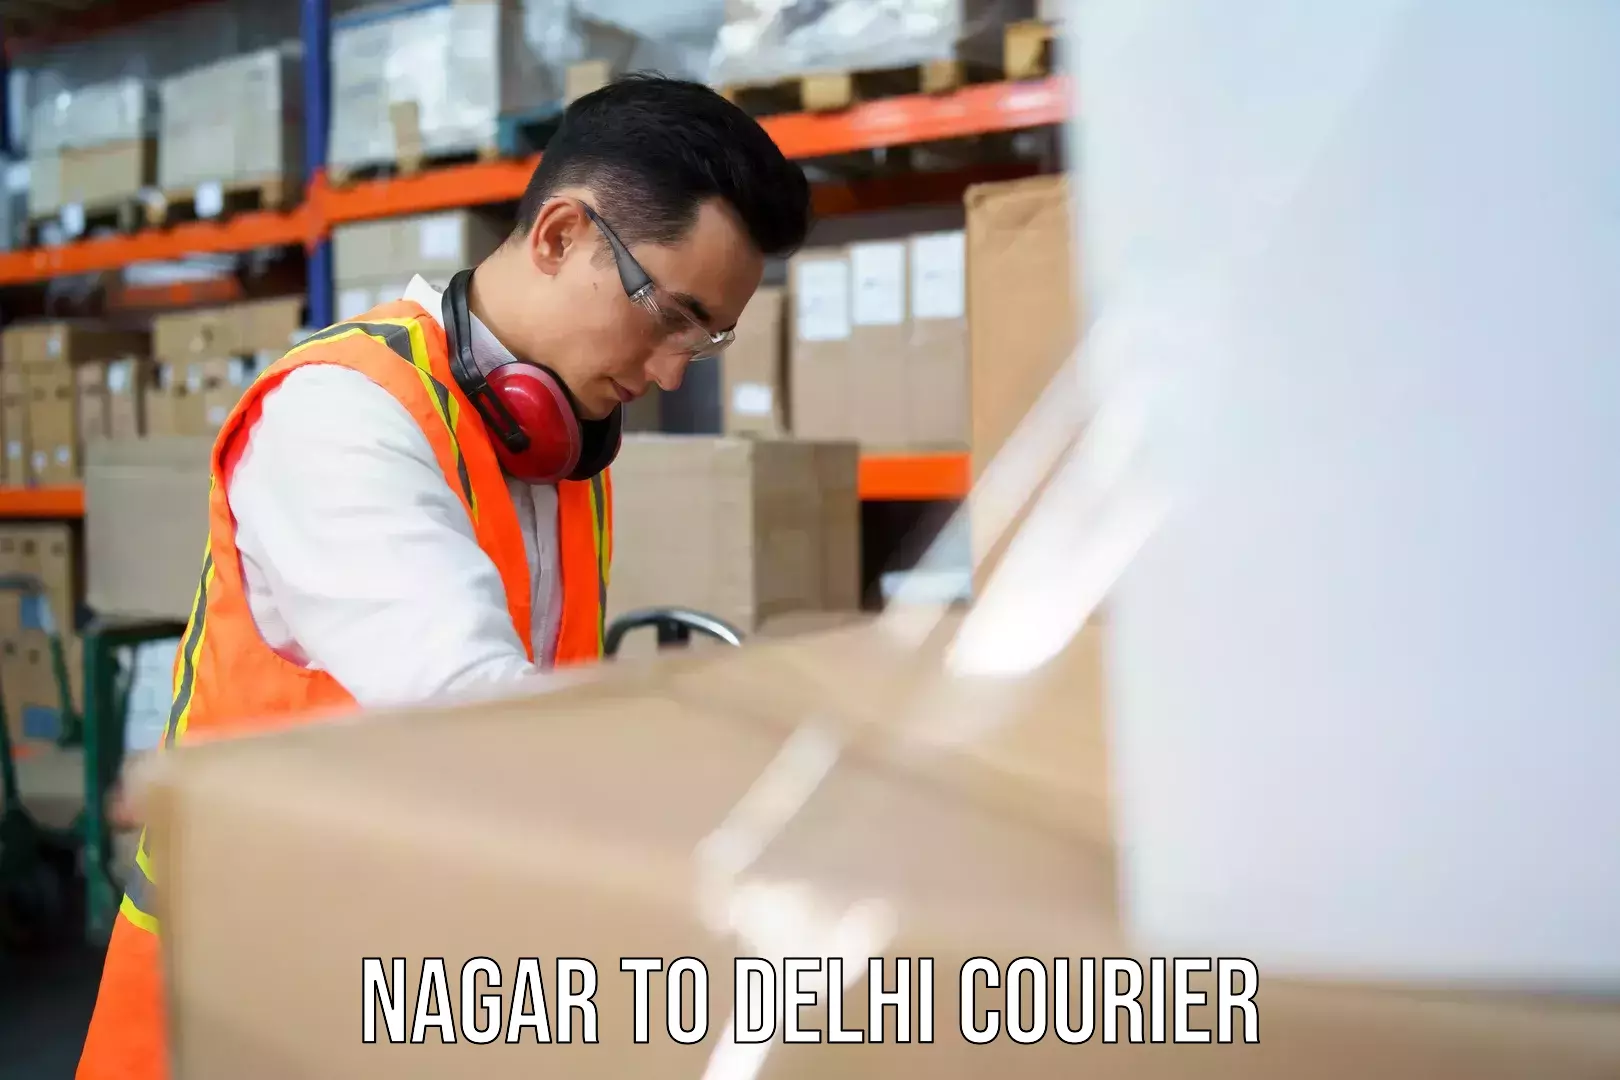 Reliable delivery network Nagar to Lodhi Road